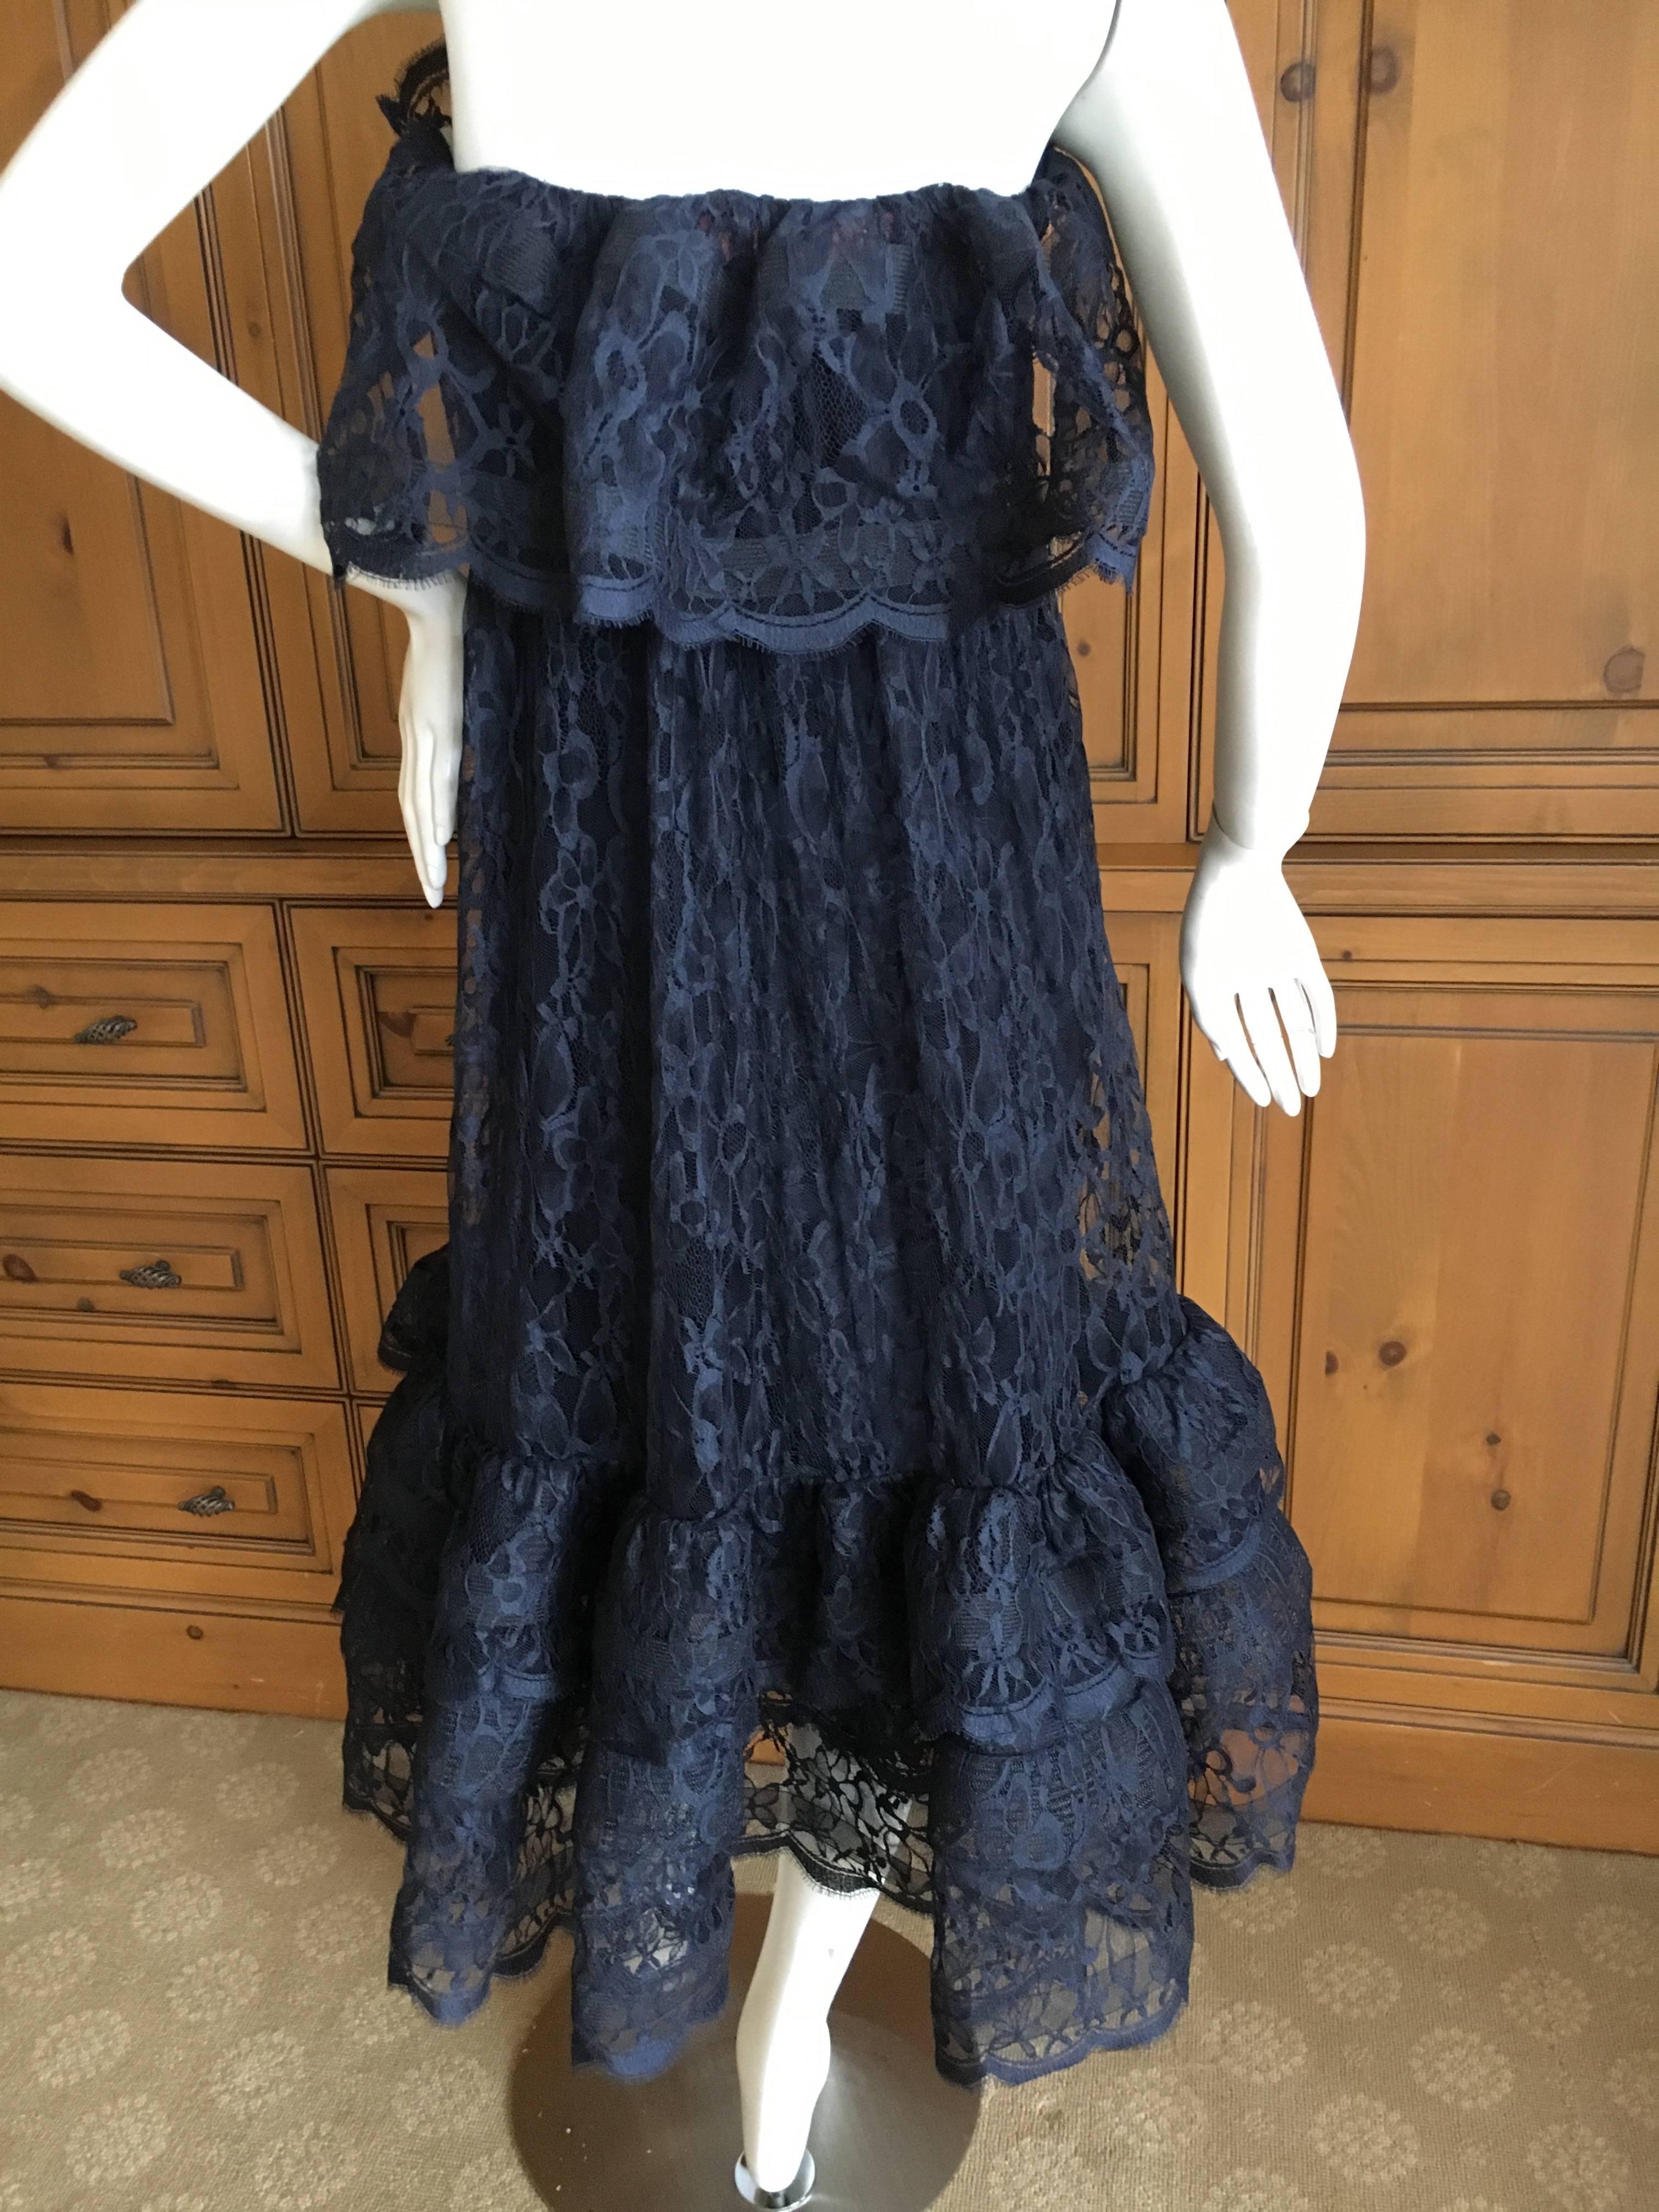 Exquisite reinterpretation of a 1950's Balenciaga evening dress by Nicholas Ghieresque.
New with Barneys tags, it retailed for $7295.
Hard to capture in a photo, this is is so pretty.
Full inner corset.
Size 38
Bust 36